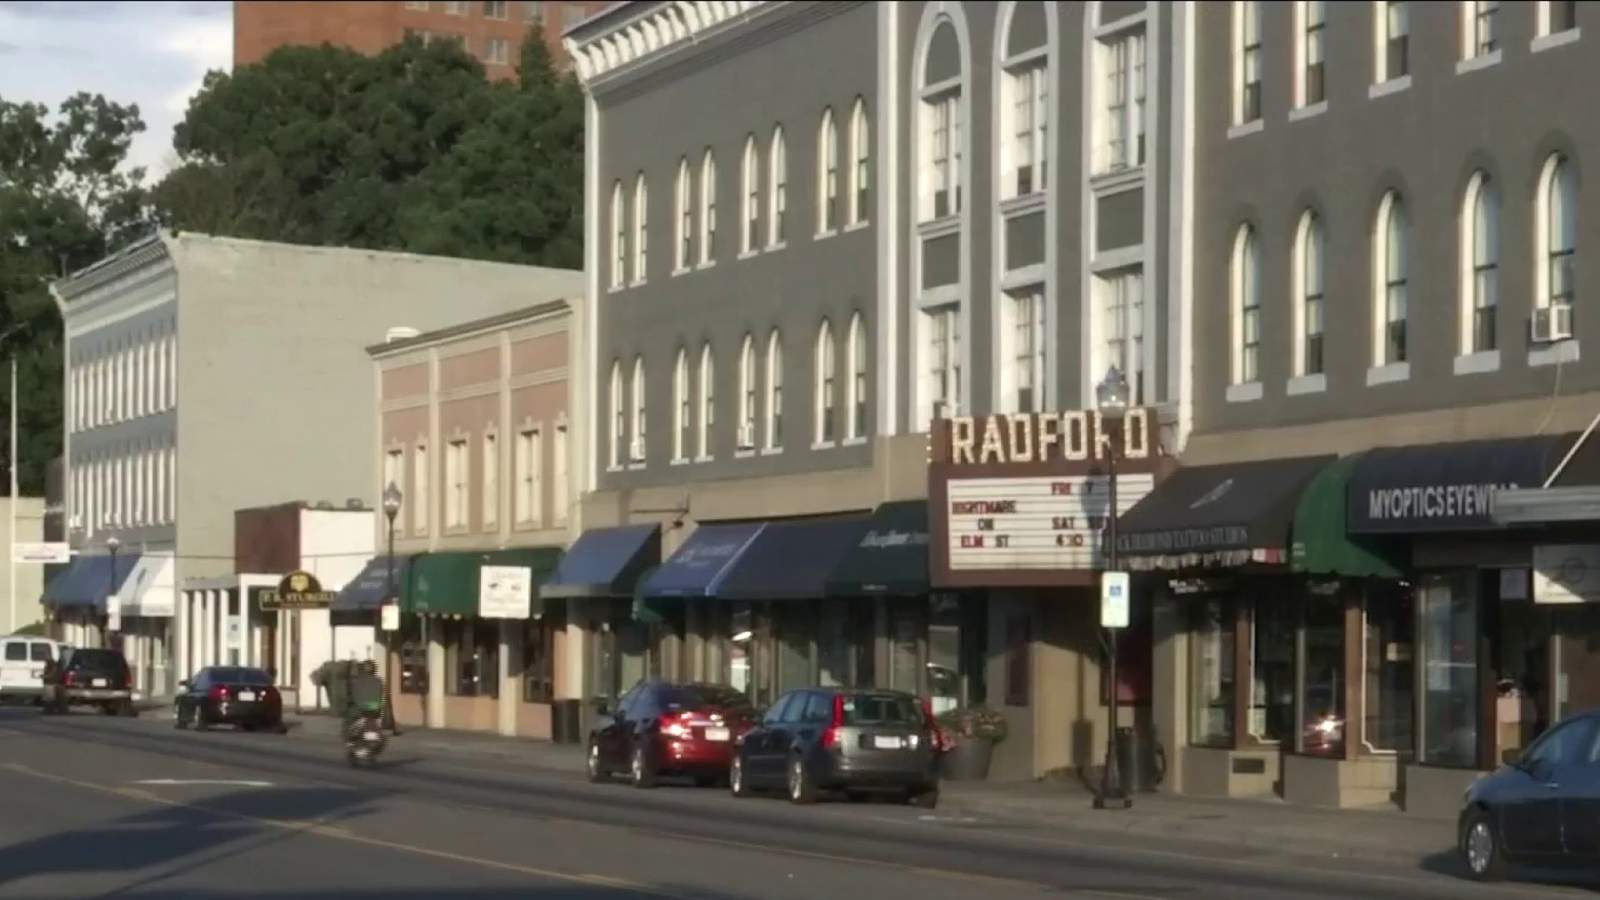 City of Radford bans gatherings of more than 50 people through end of August